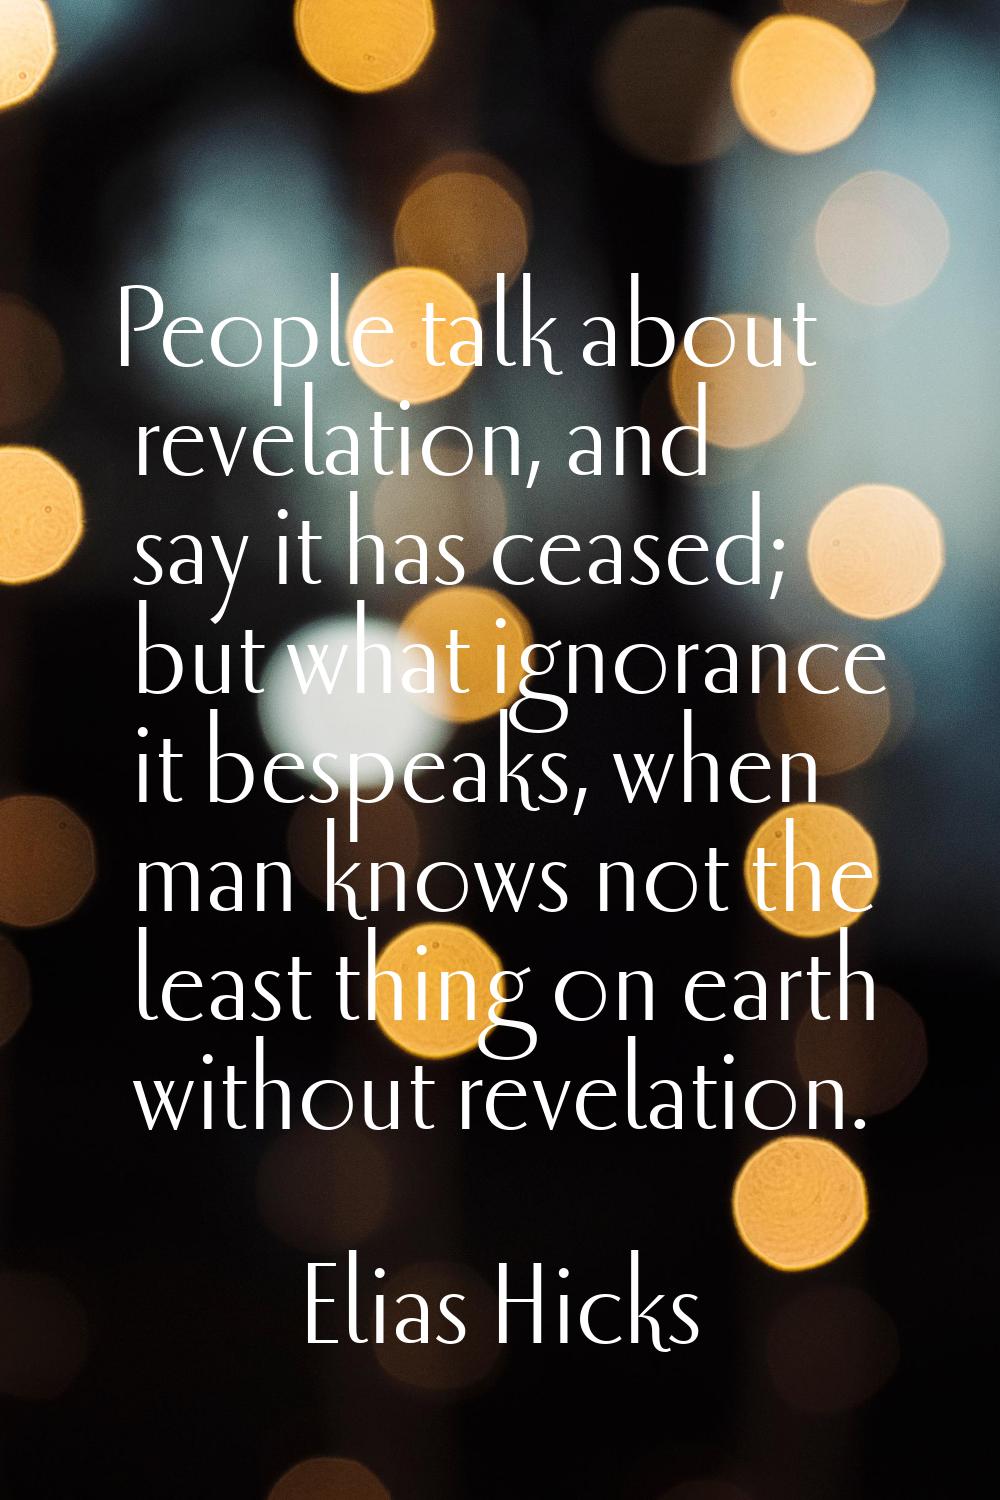 People talk about revelation, and say it has ceased; but what ignorance it bespeaks, when man knows